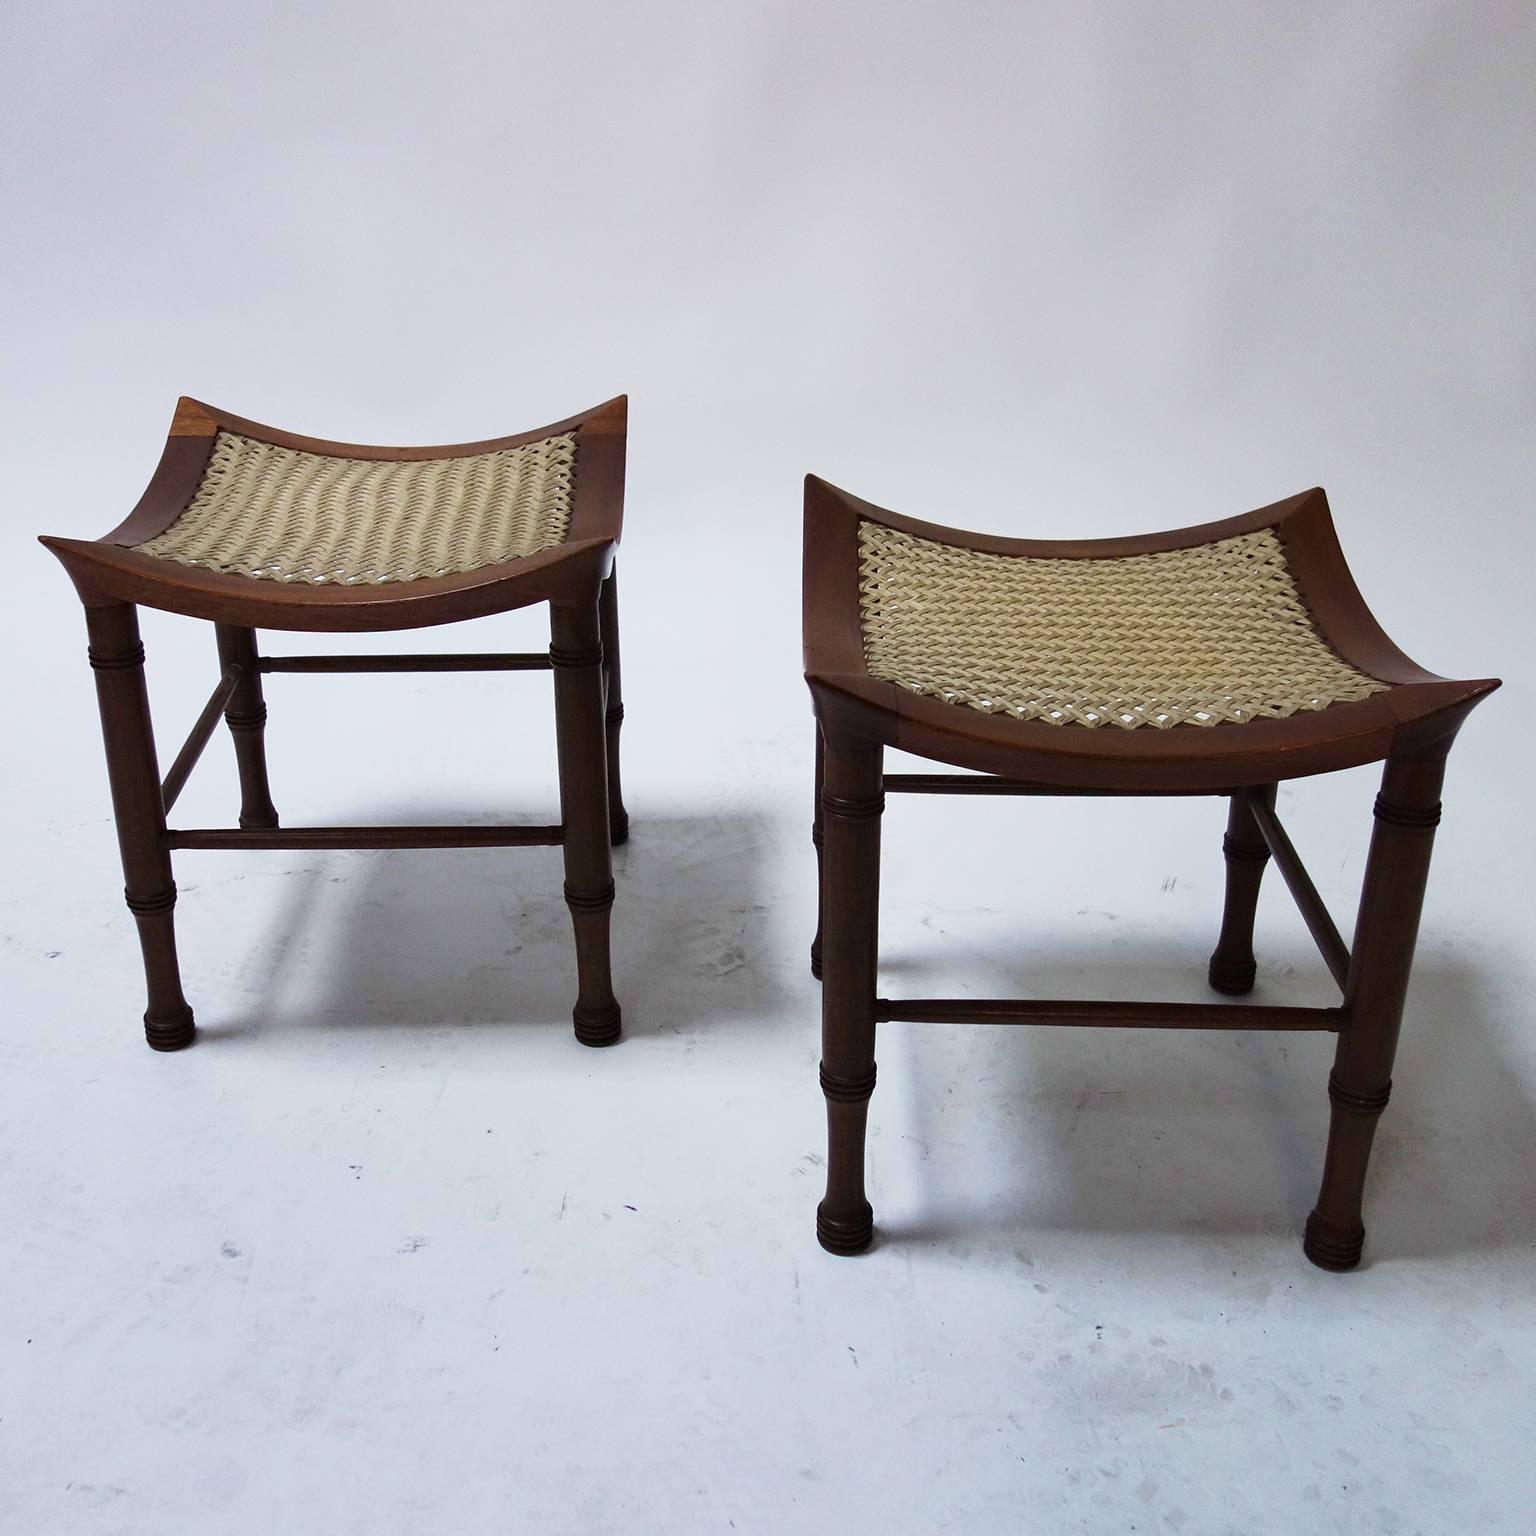 Pair of Arts & Crafts 'Thebes' stool by Liberty & Co with curved seat.

Turned walnut legs and stretchers.
Woven jute seats.

Original condition.

From Melina Mercouri private collection.